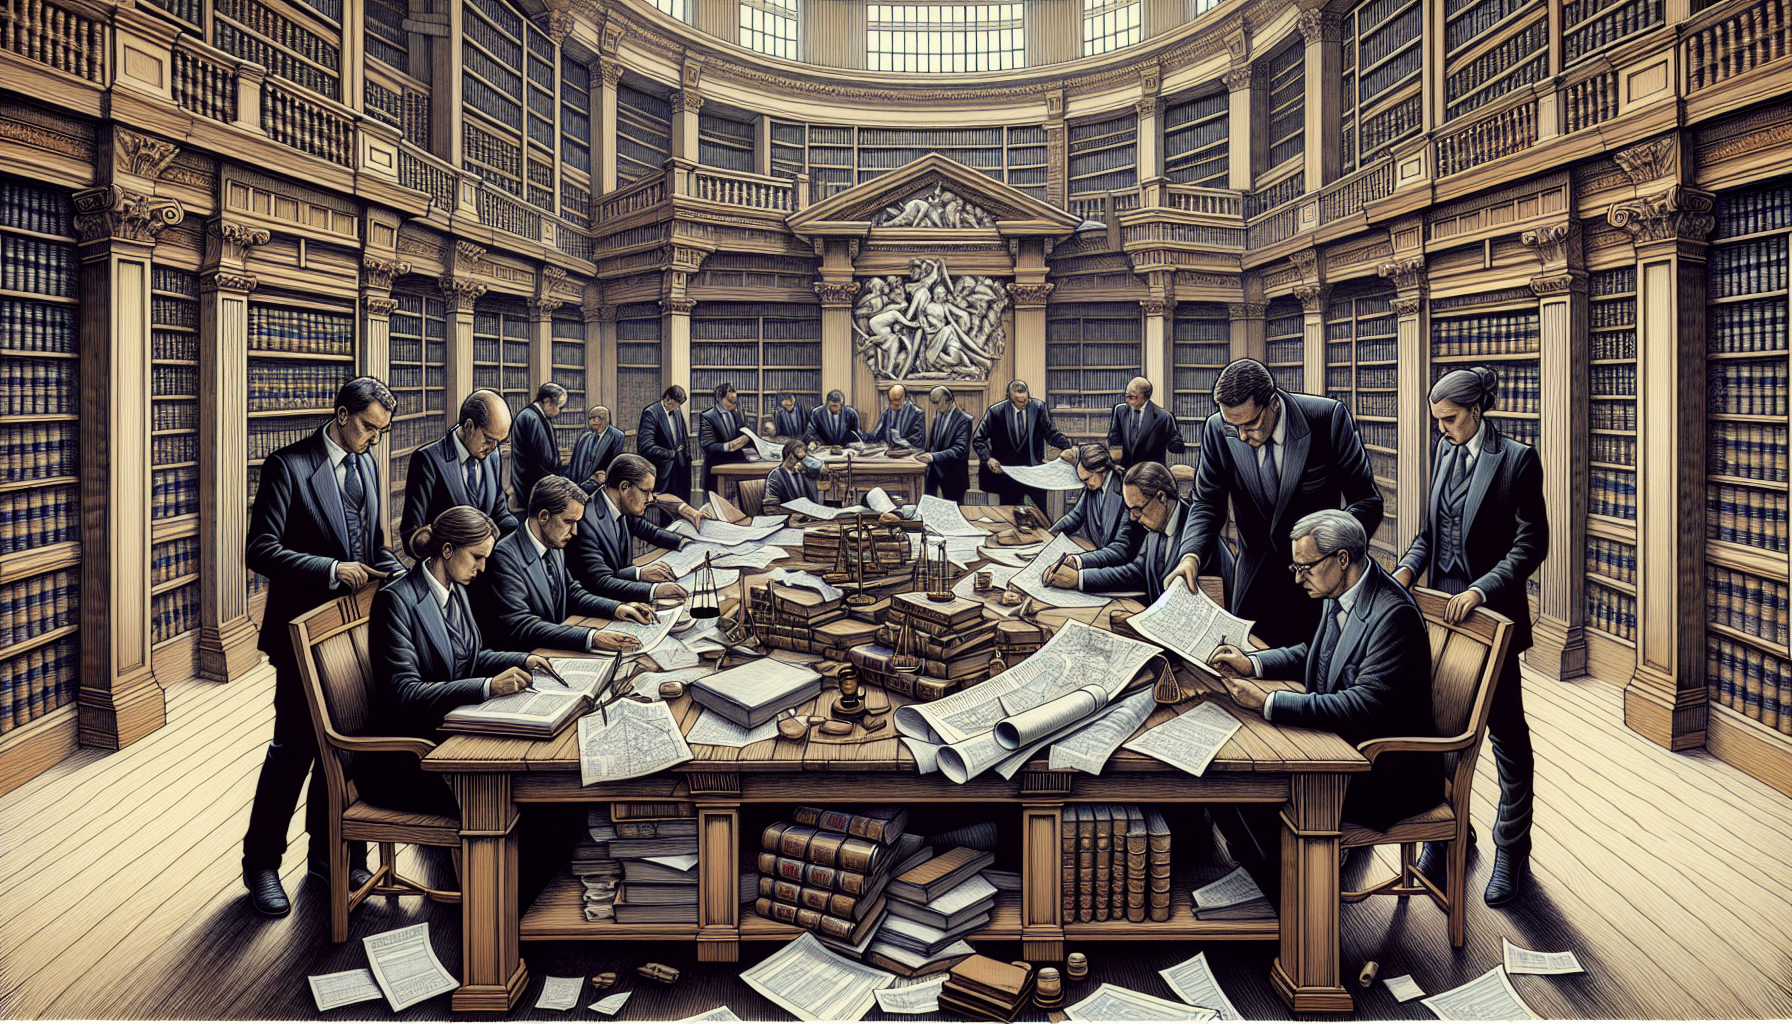 Illustration of a legal team preparing for court proceedings